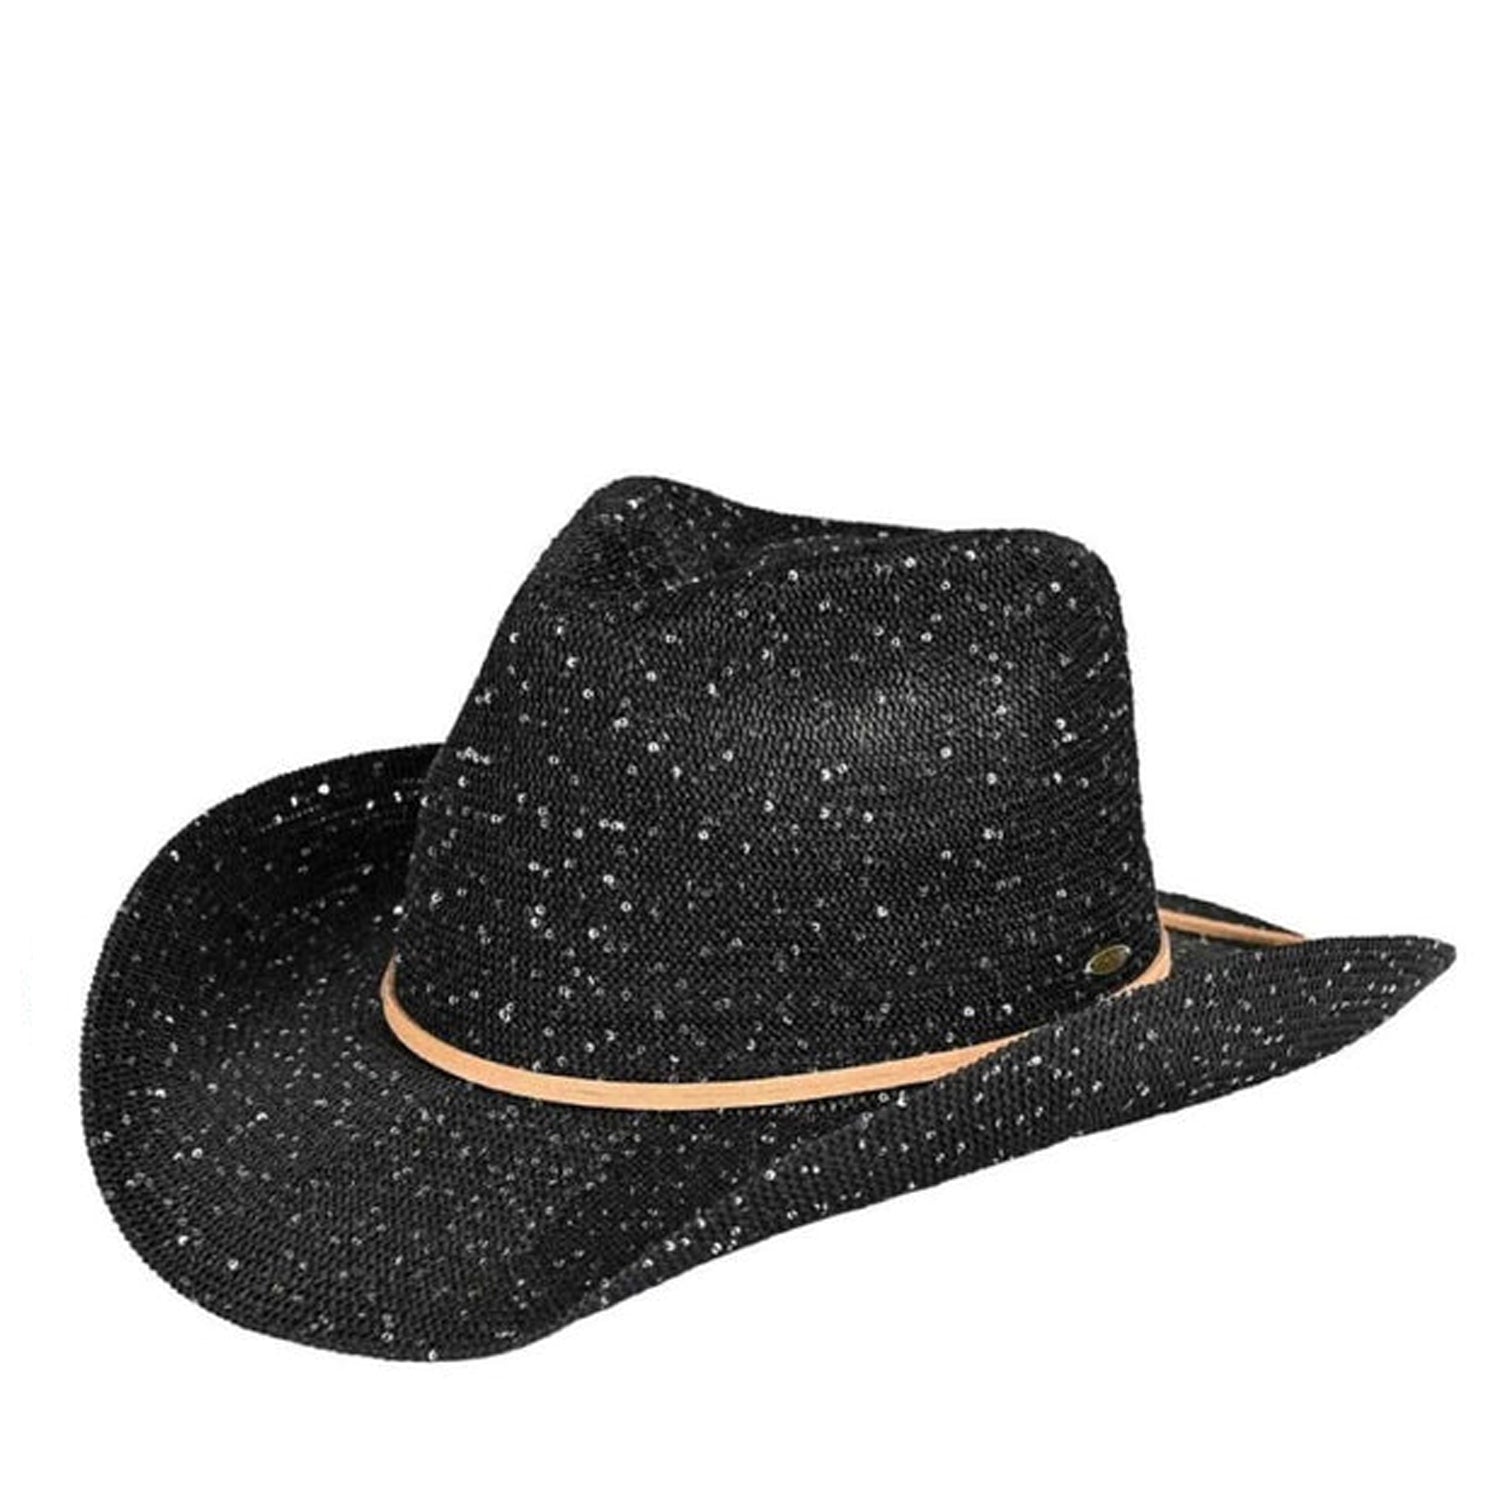 CBC-03 Cowgirl Hat with Glitter Black